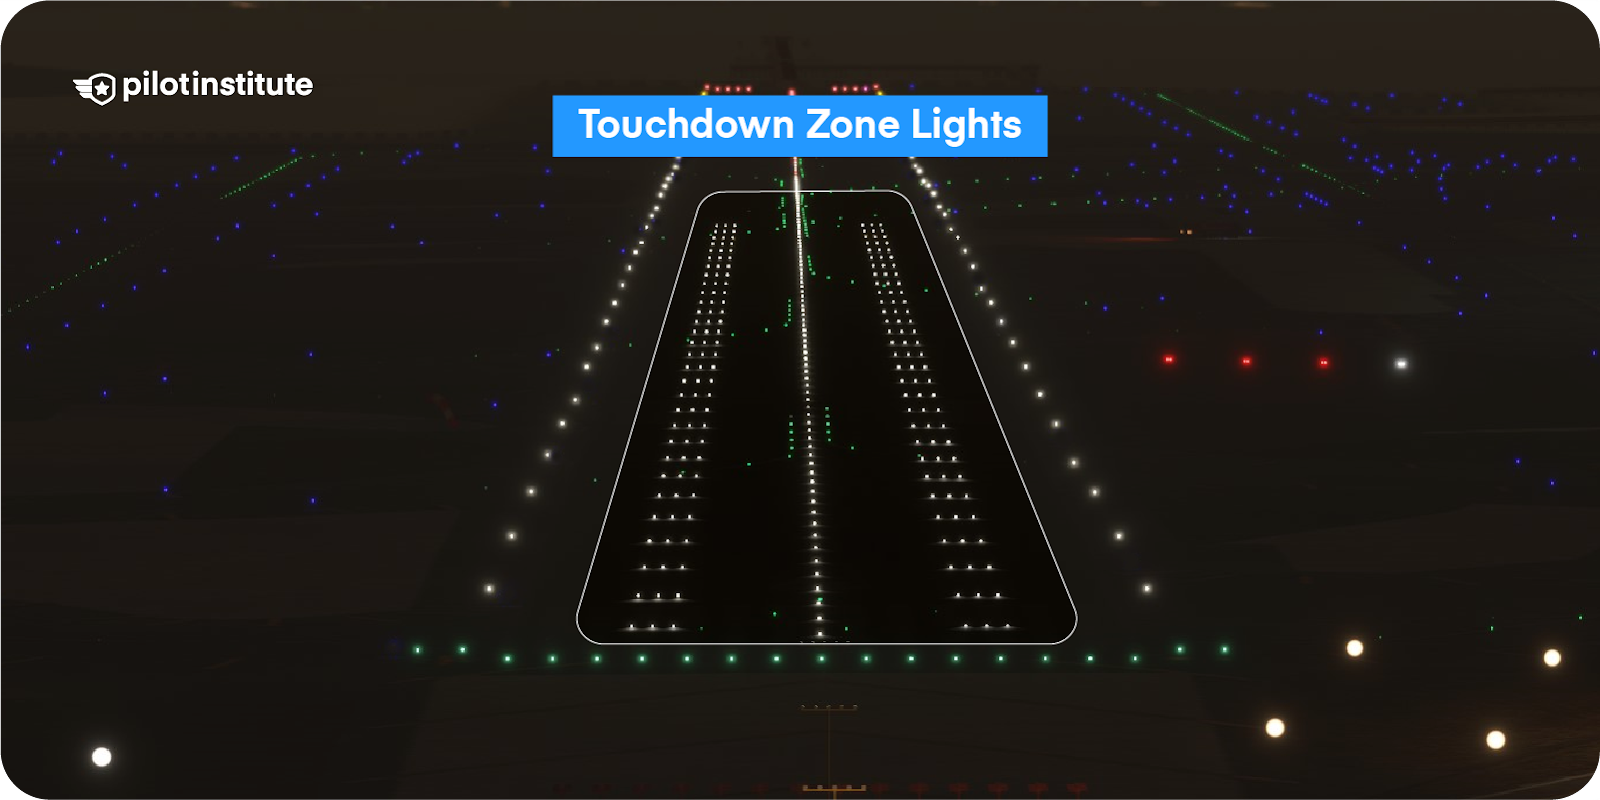 Runway with touchdown zone lights highlighted.